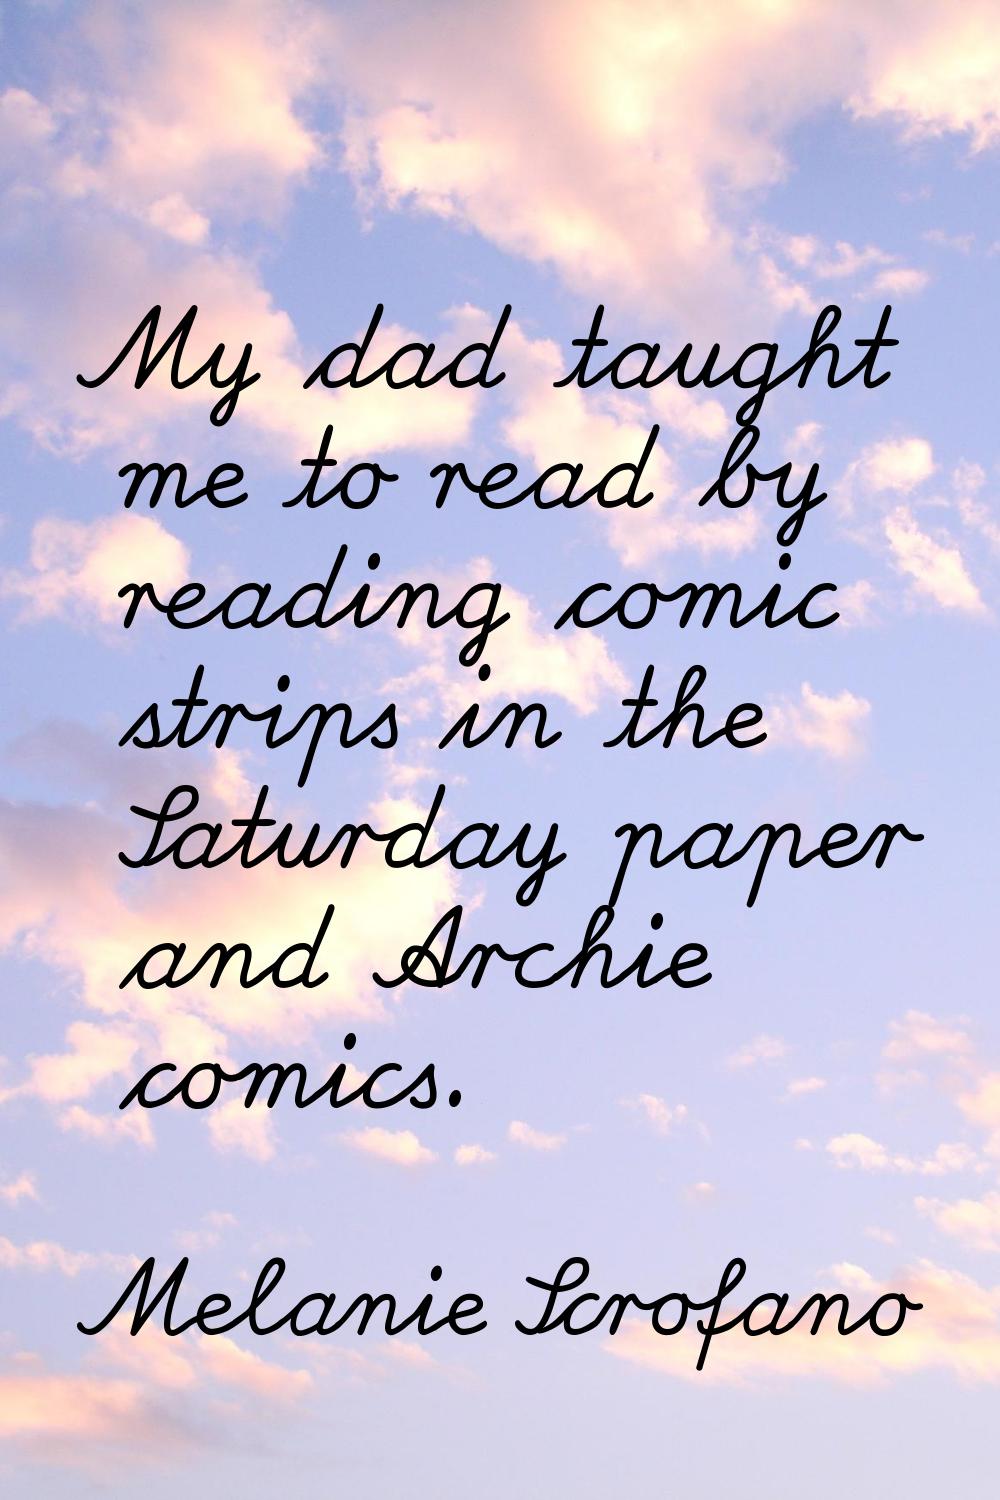 My dad taught me to read by reading comic strips in the Saturday paper and Archie comics.